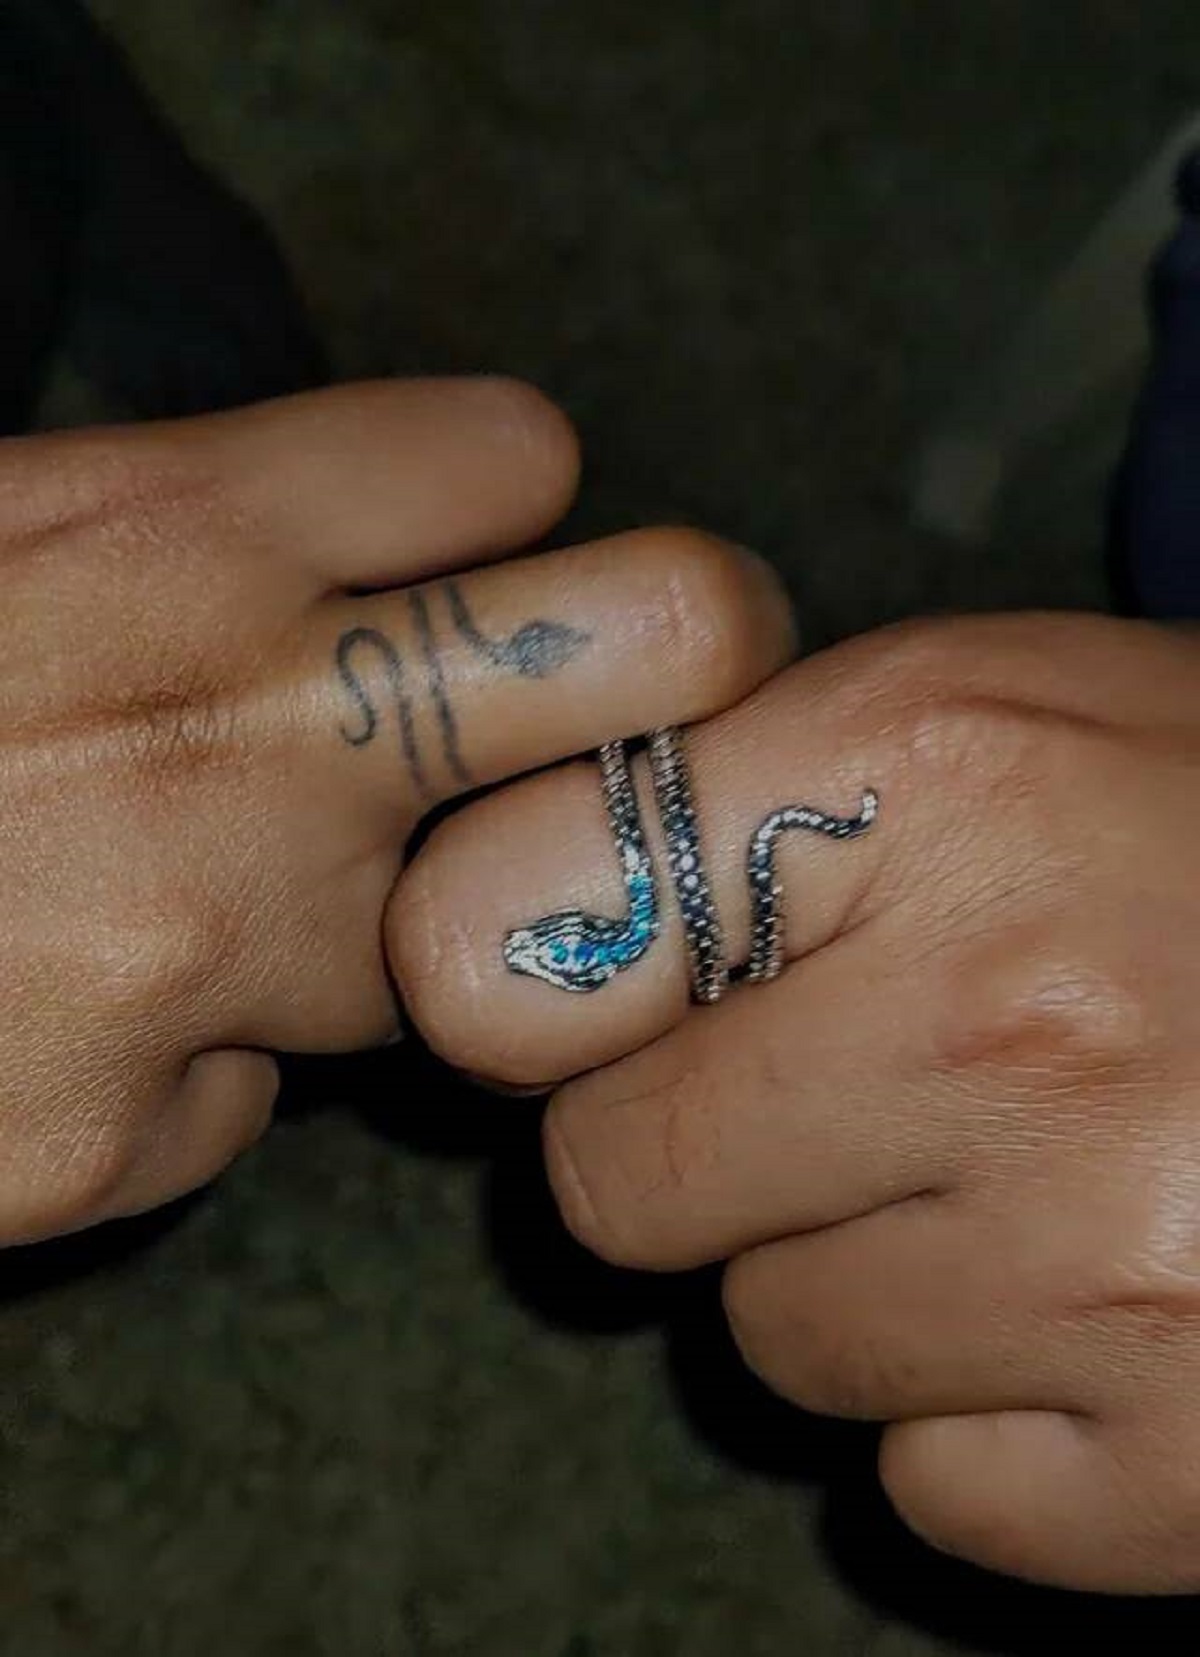 "Stranger's tattoo that matched my buddy's snake ring"